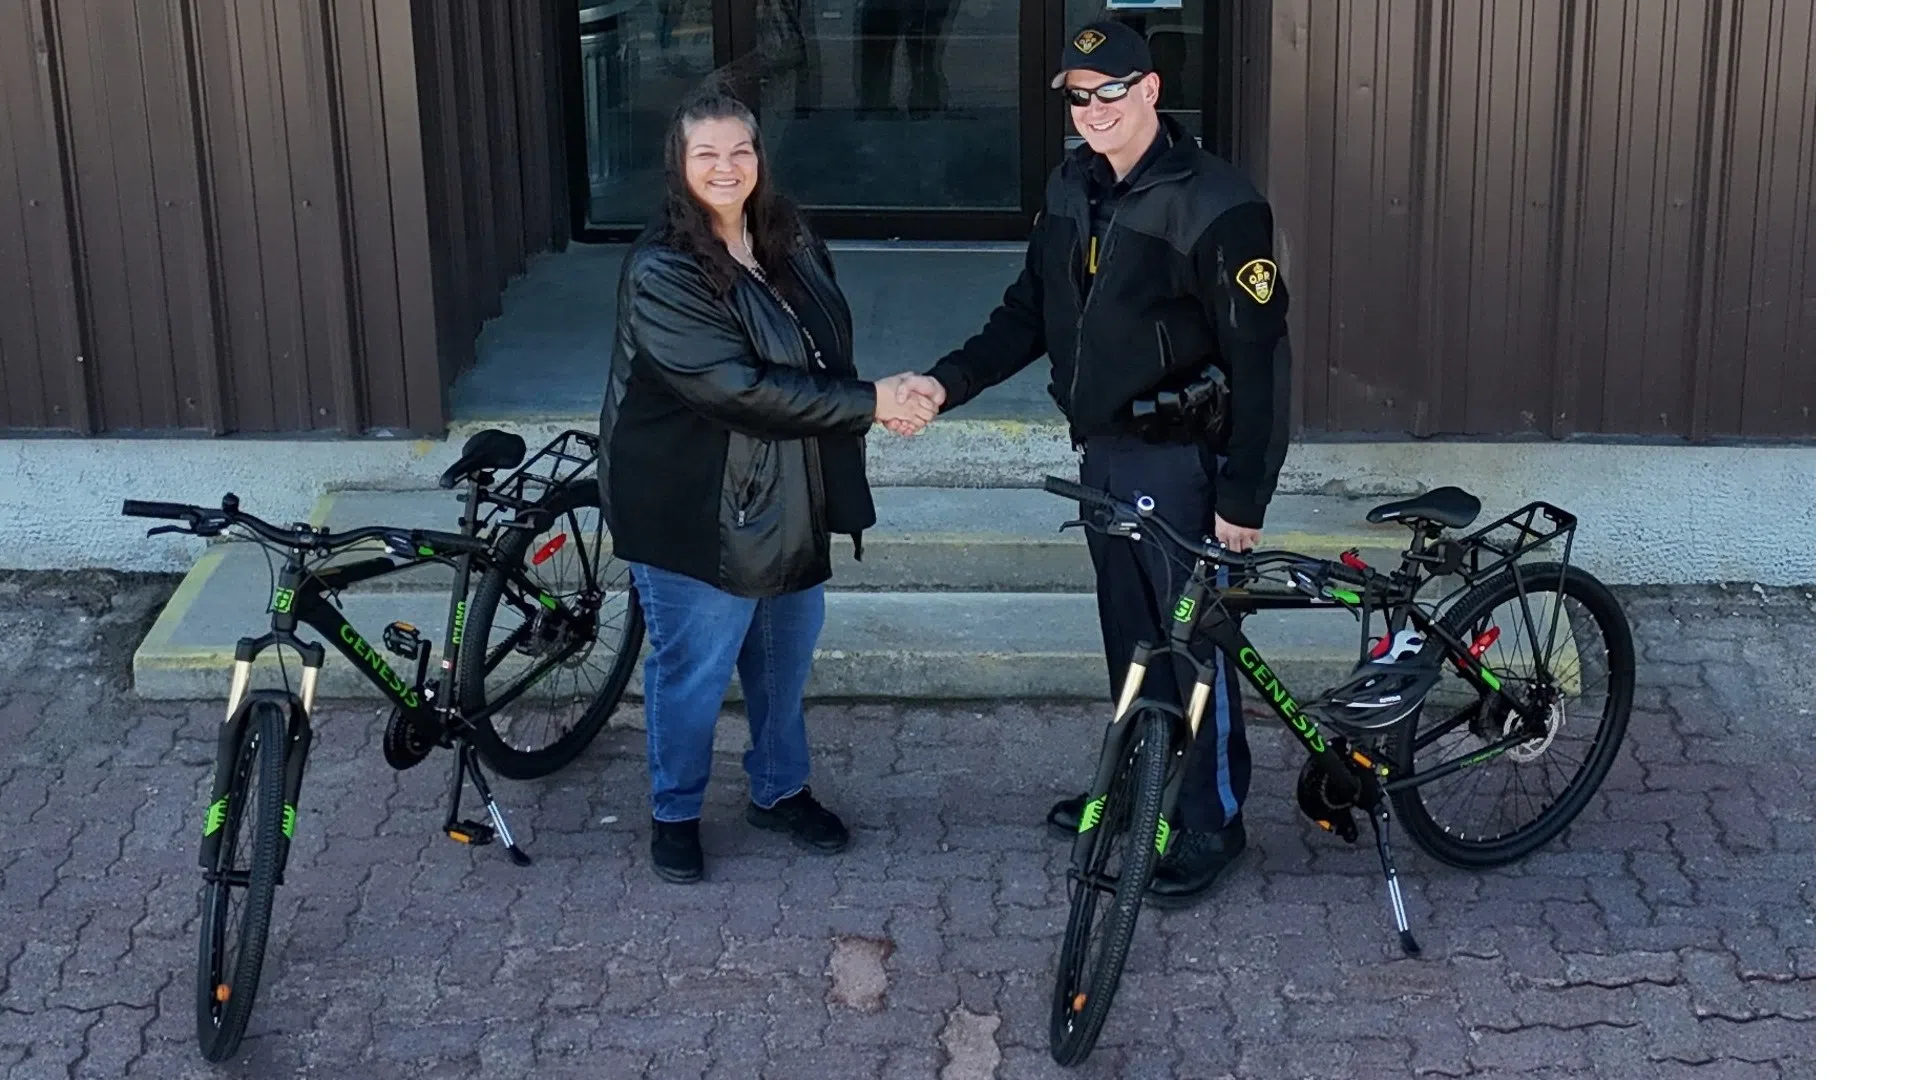 Bicycle patrol coming to Dryden